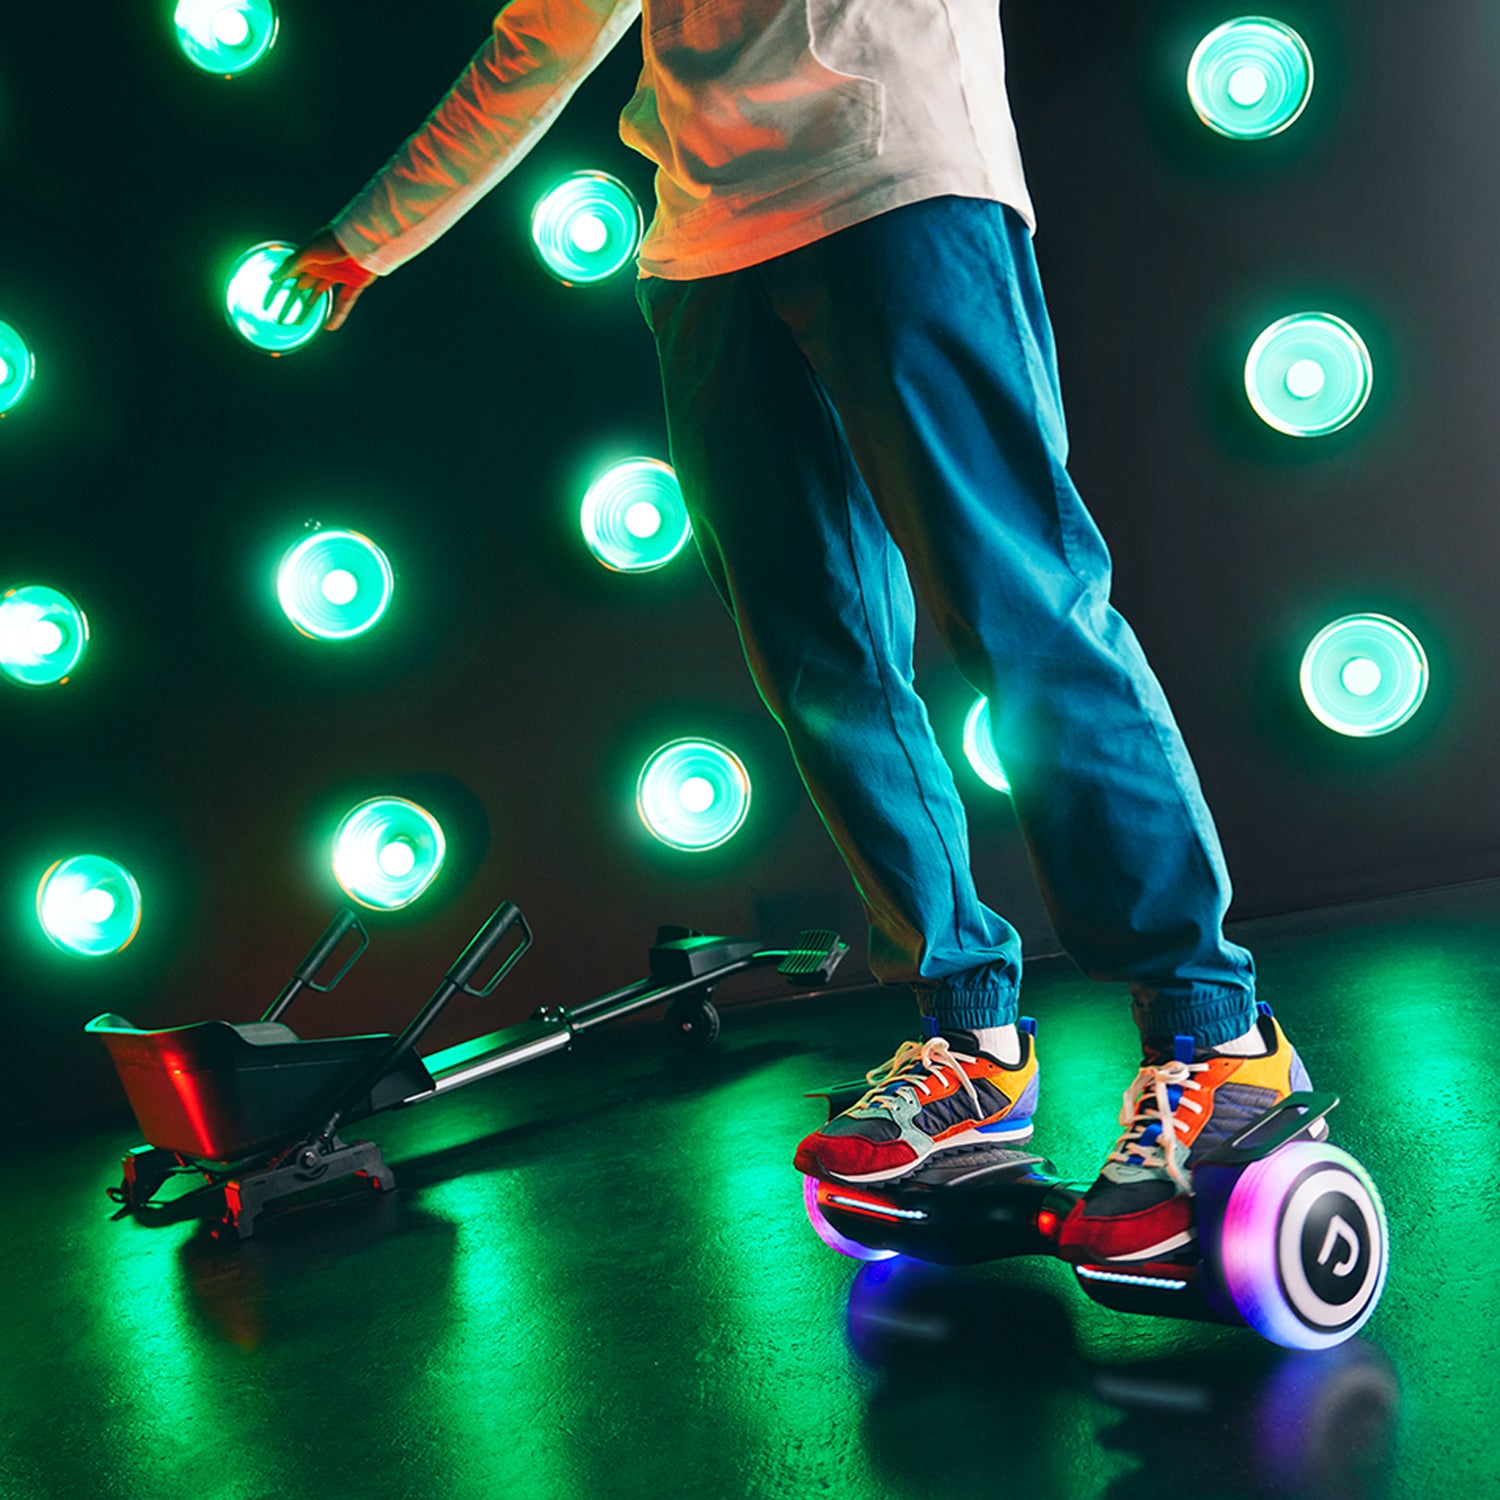 person riding the lit up hoverboard only